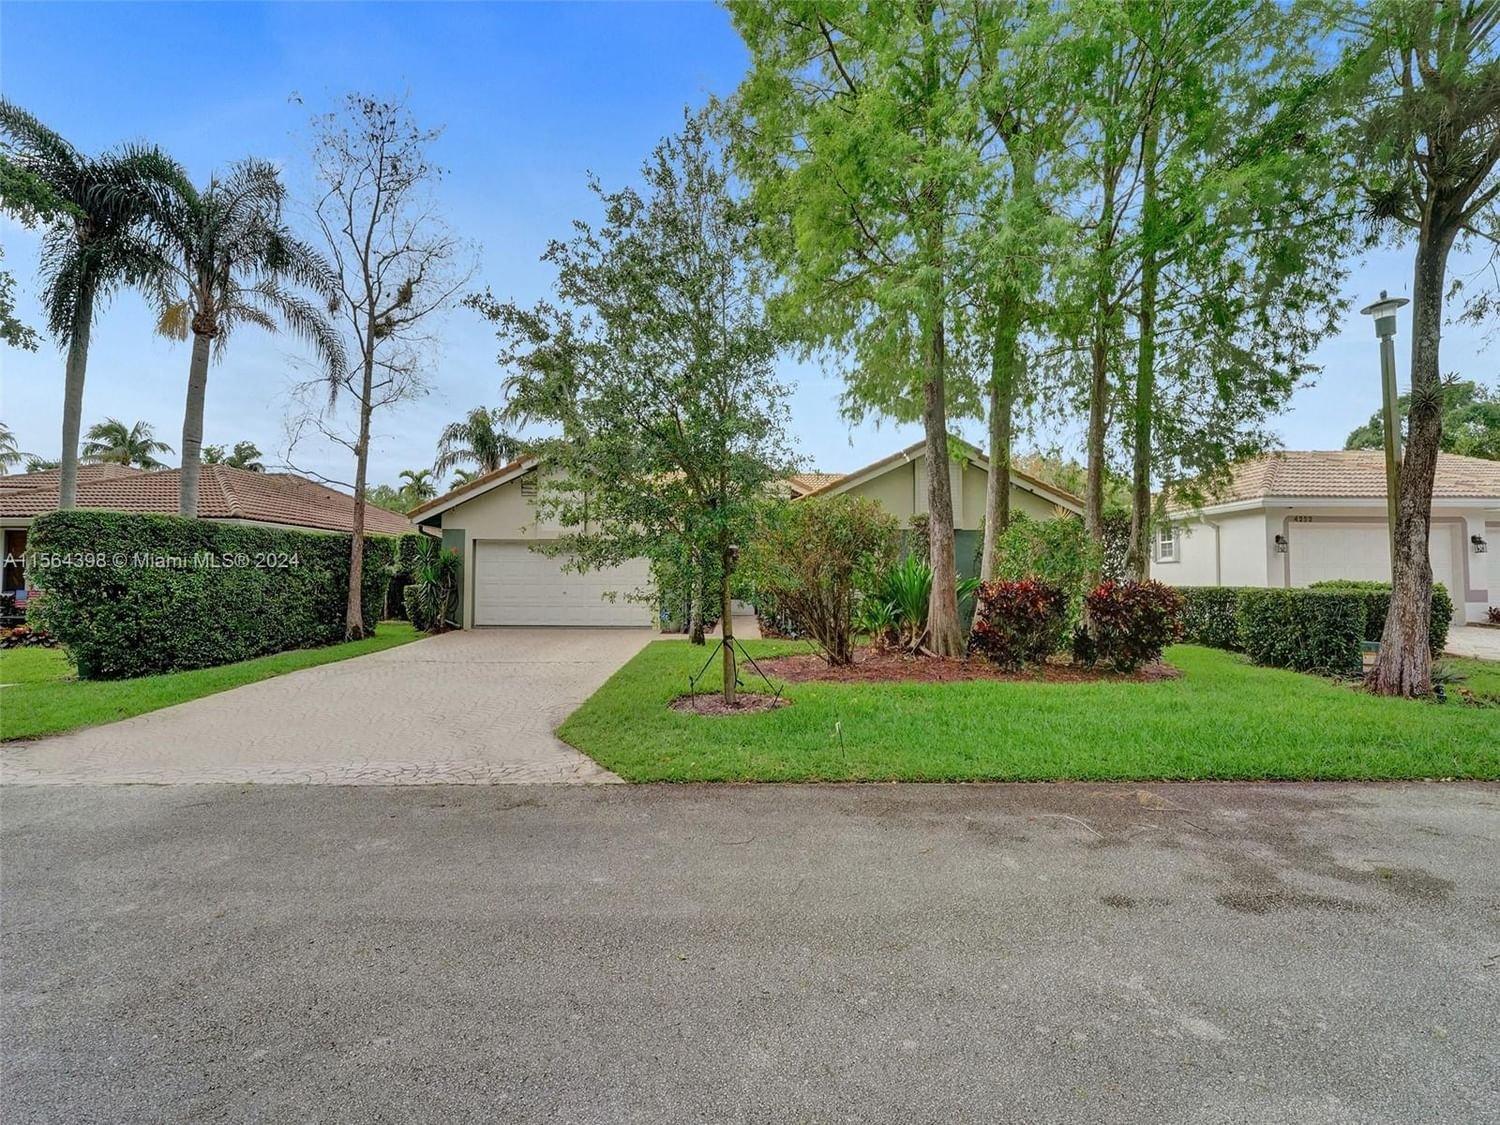 Real estate property located at 4242 66th St, Broward County, WINSTON PARK SECTION THRE, Coconut Creek, FL